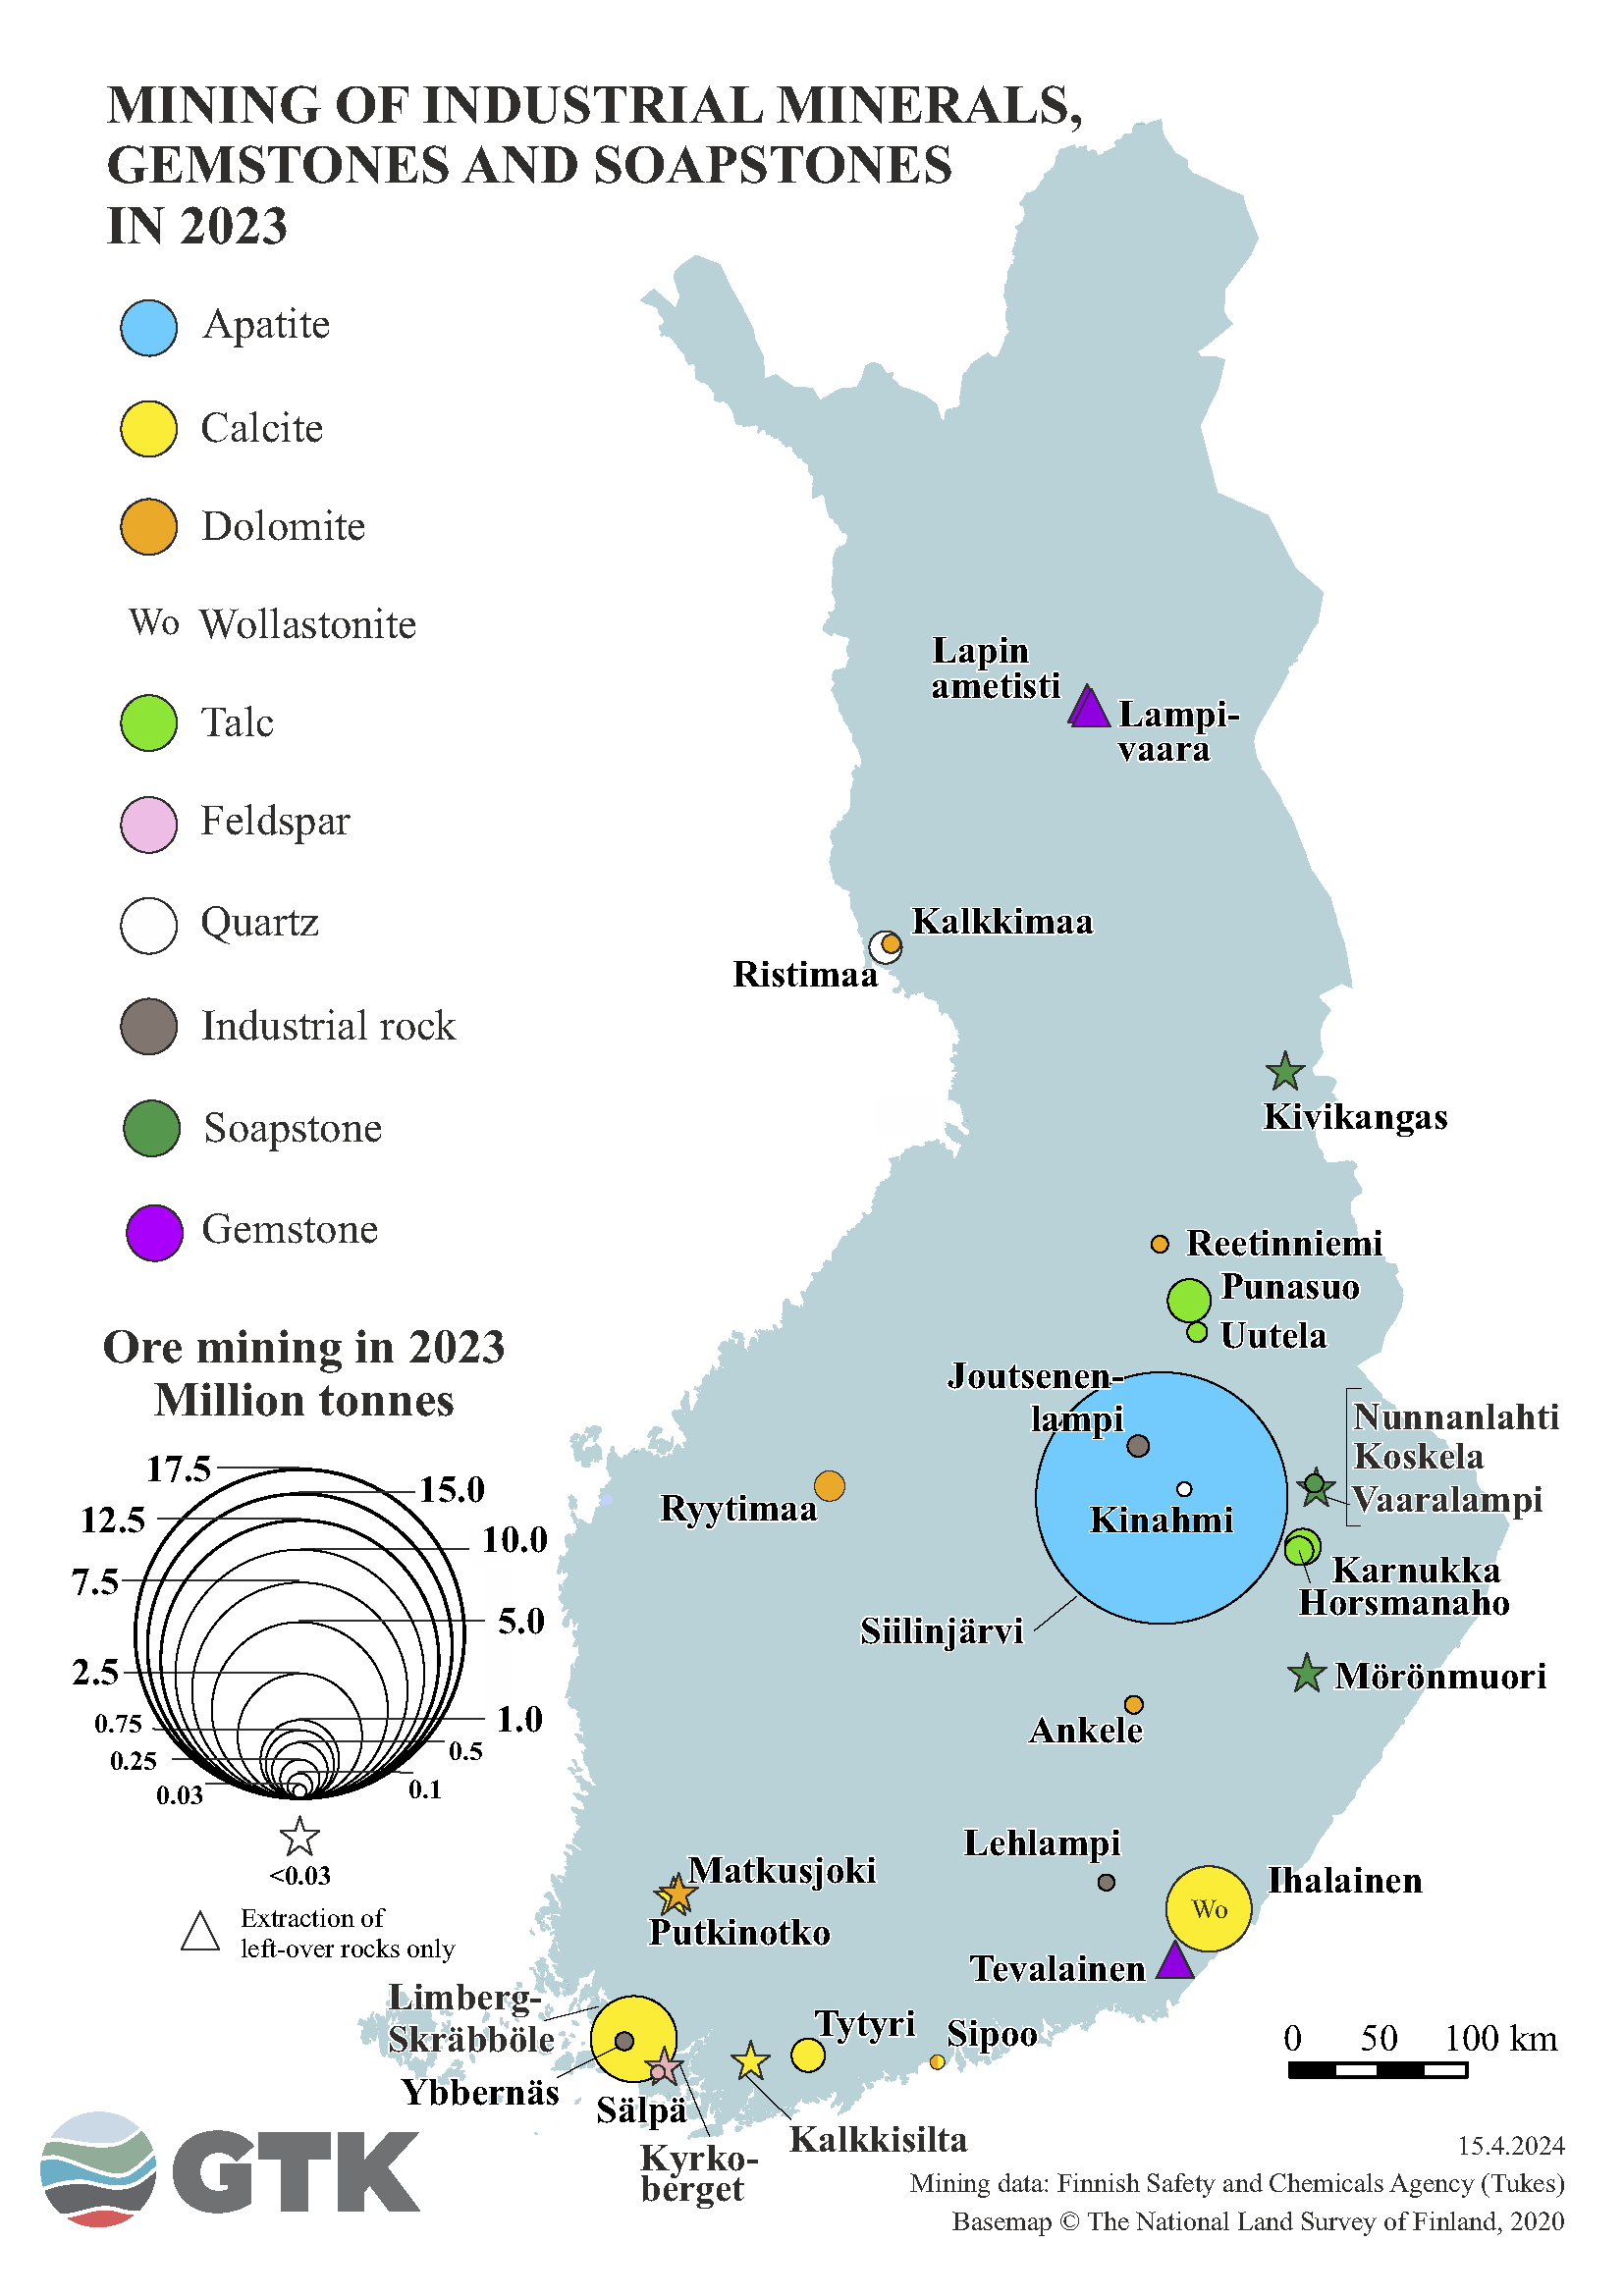 Mining of industrial minerals on the map of Finland